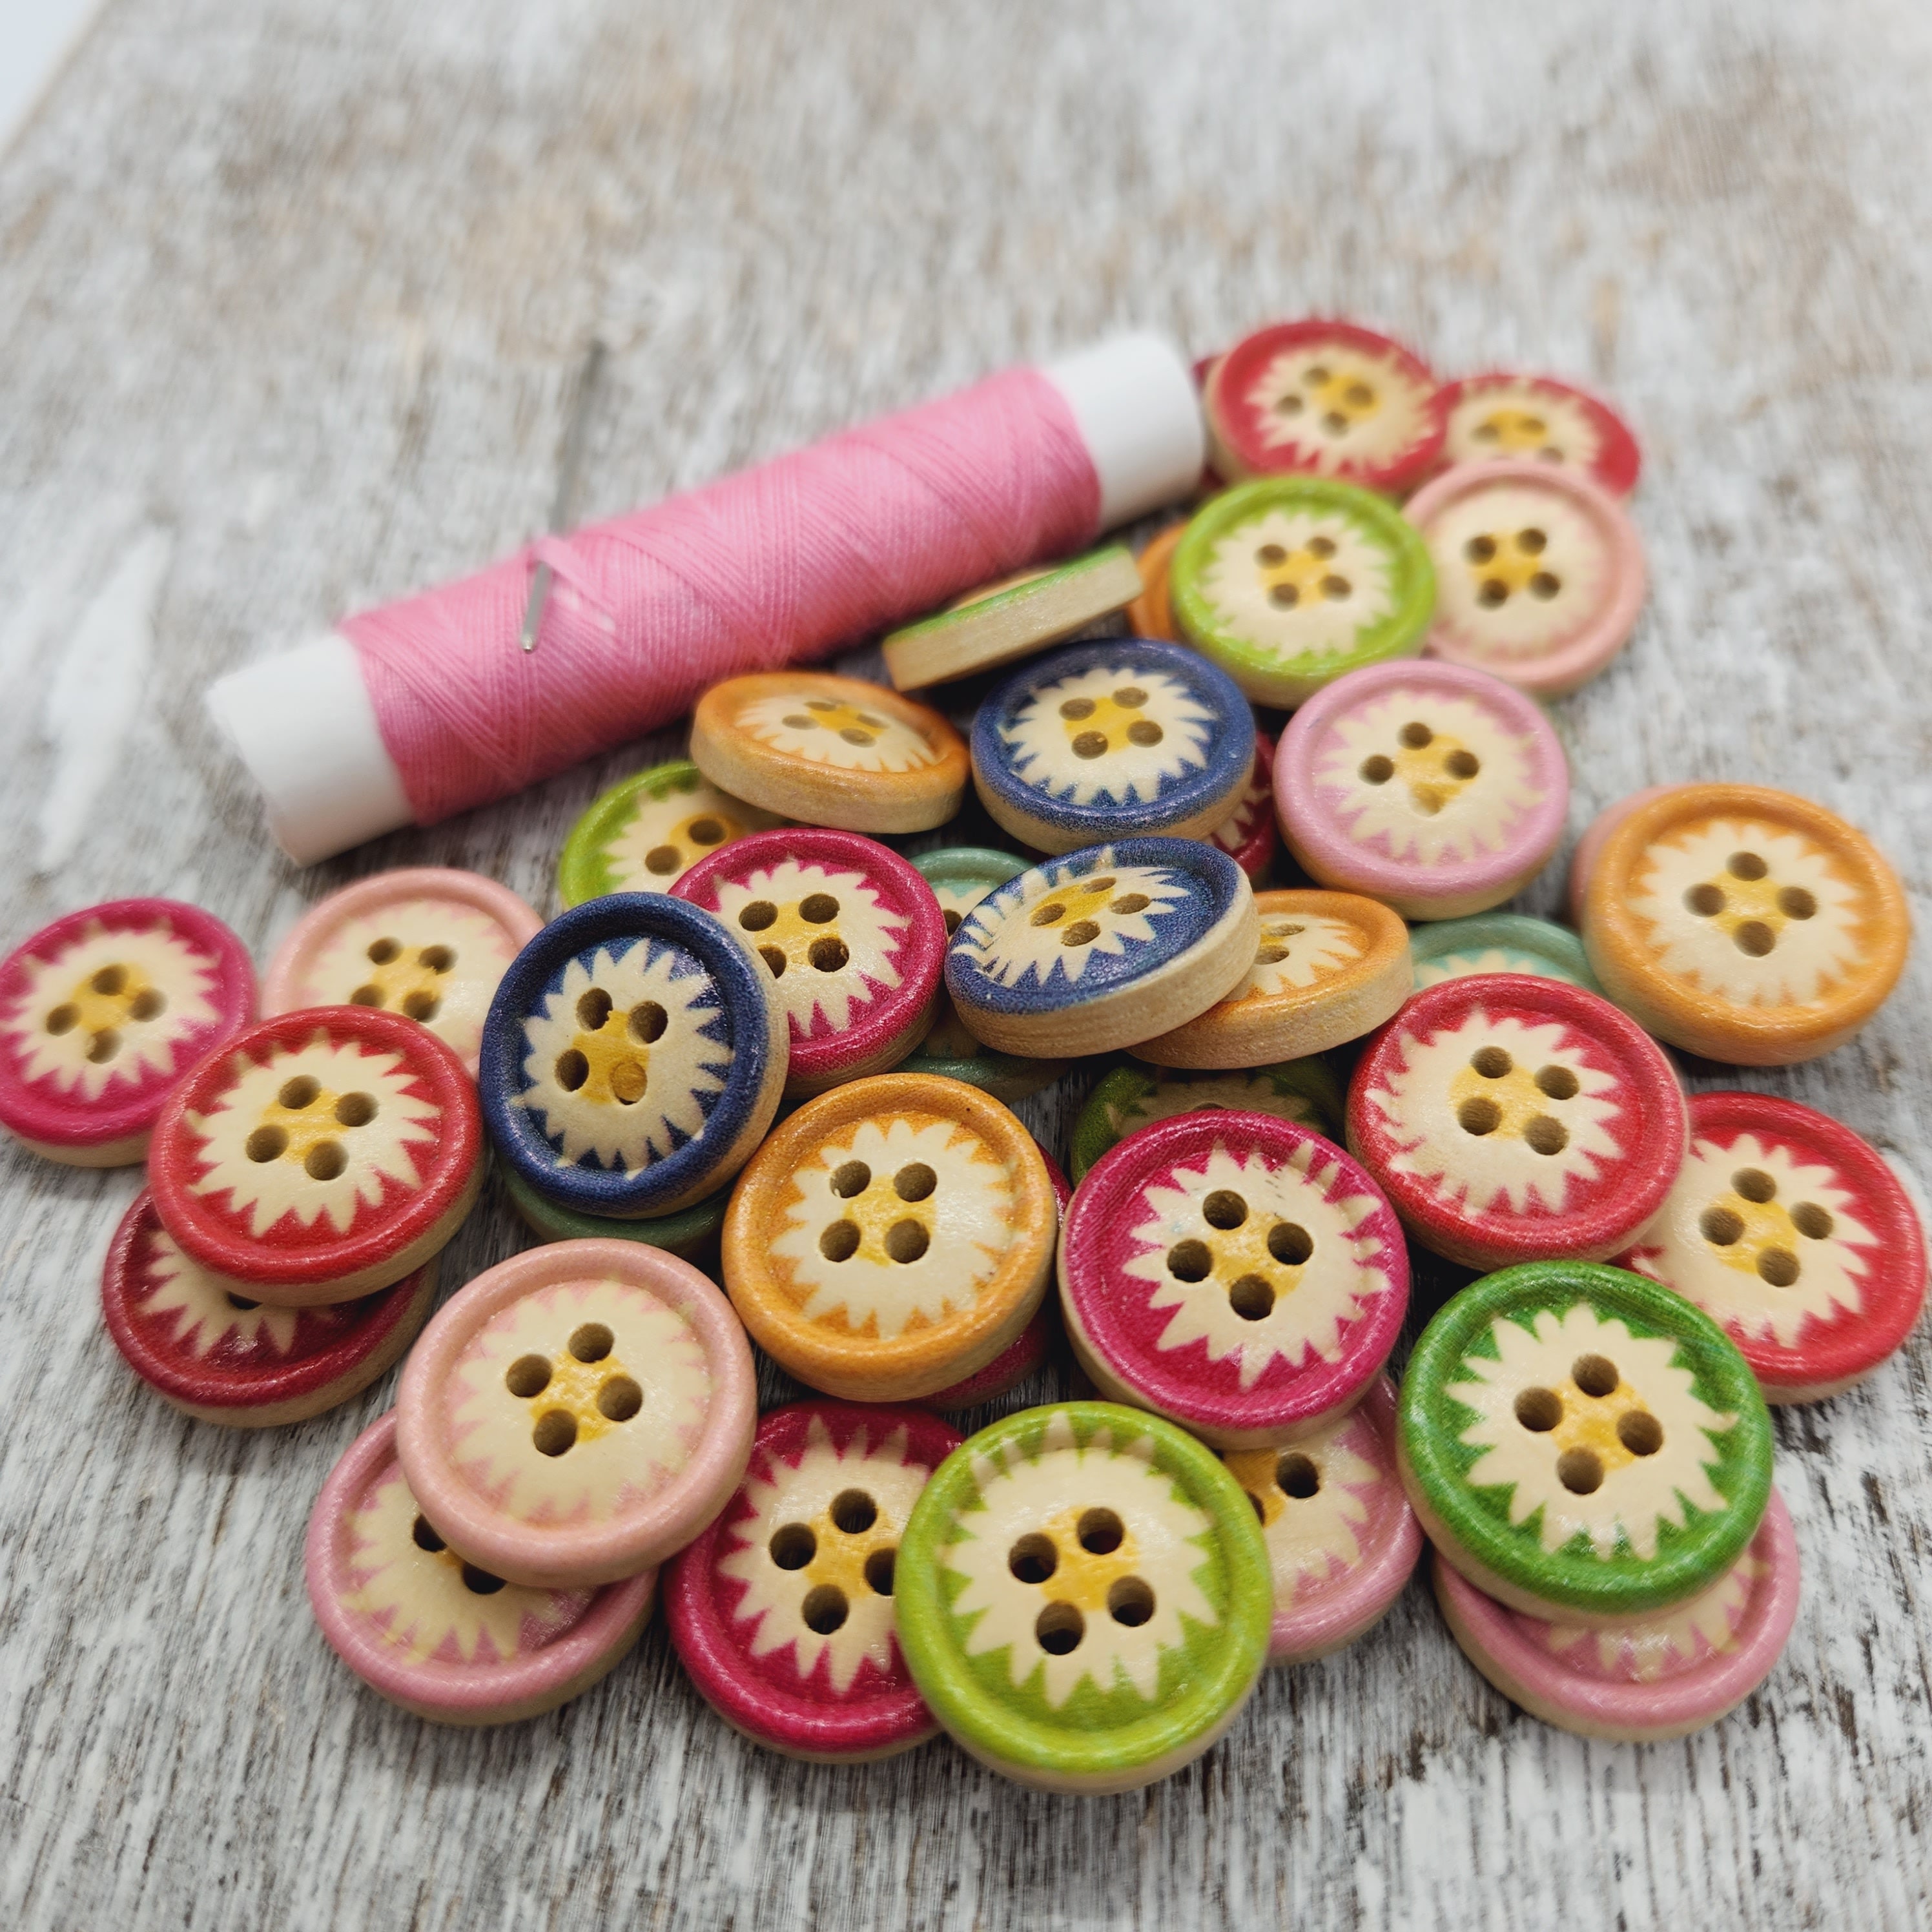 Big Bright Buttons Craft Buttons 1.2 Inch Kids Vivid Colors Large Buttons  Plastic Assorted Buttons Cute Shape Colorful Buttons Toys for Arts, Crafts